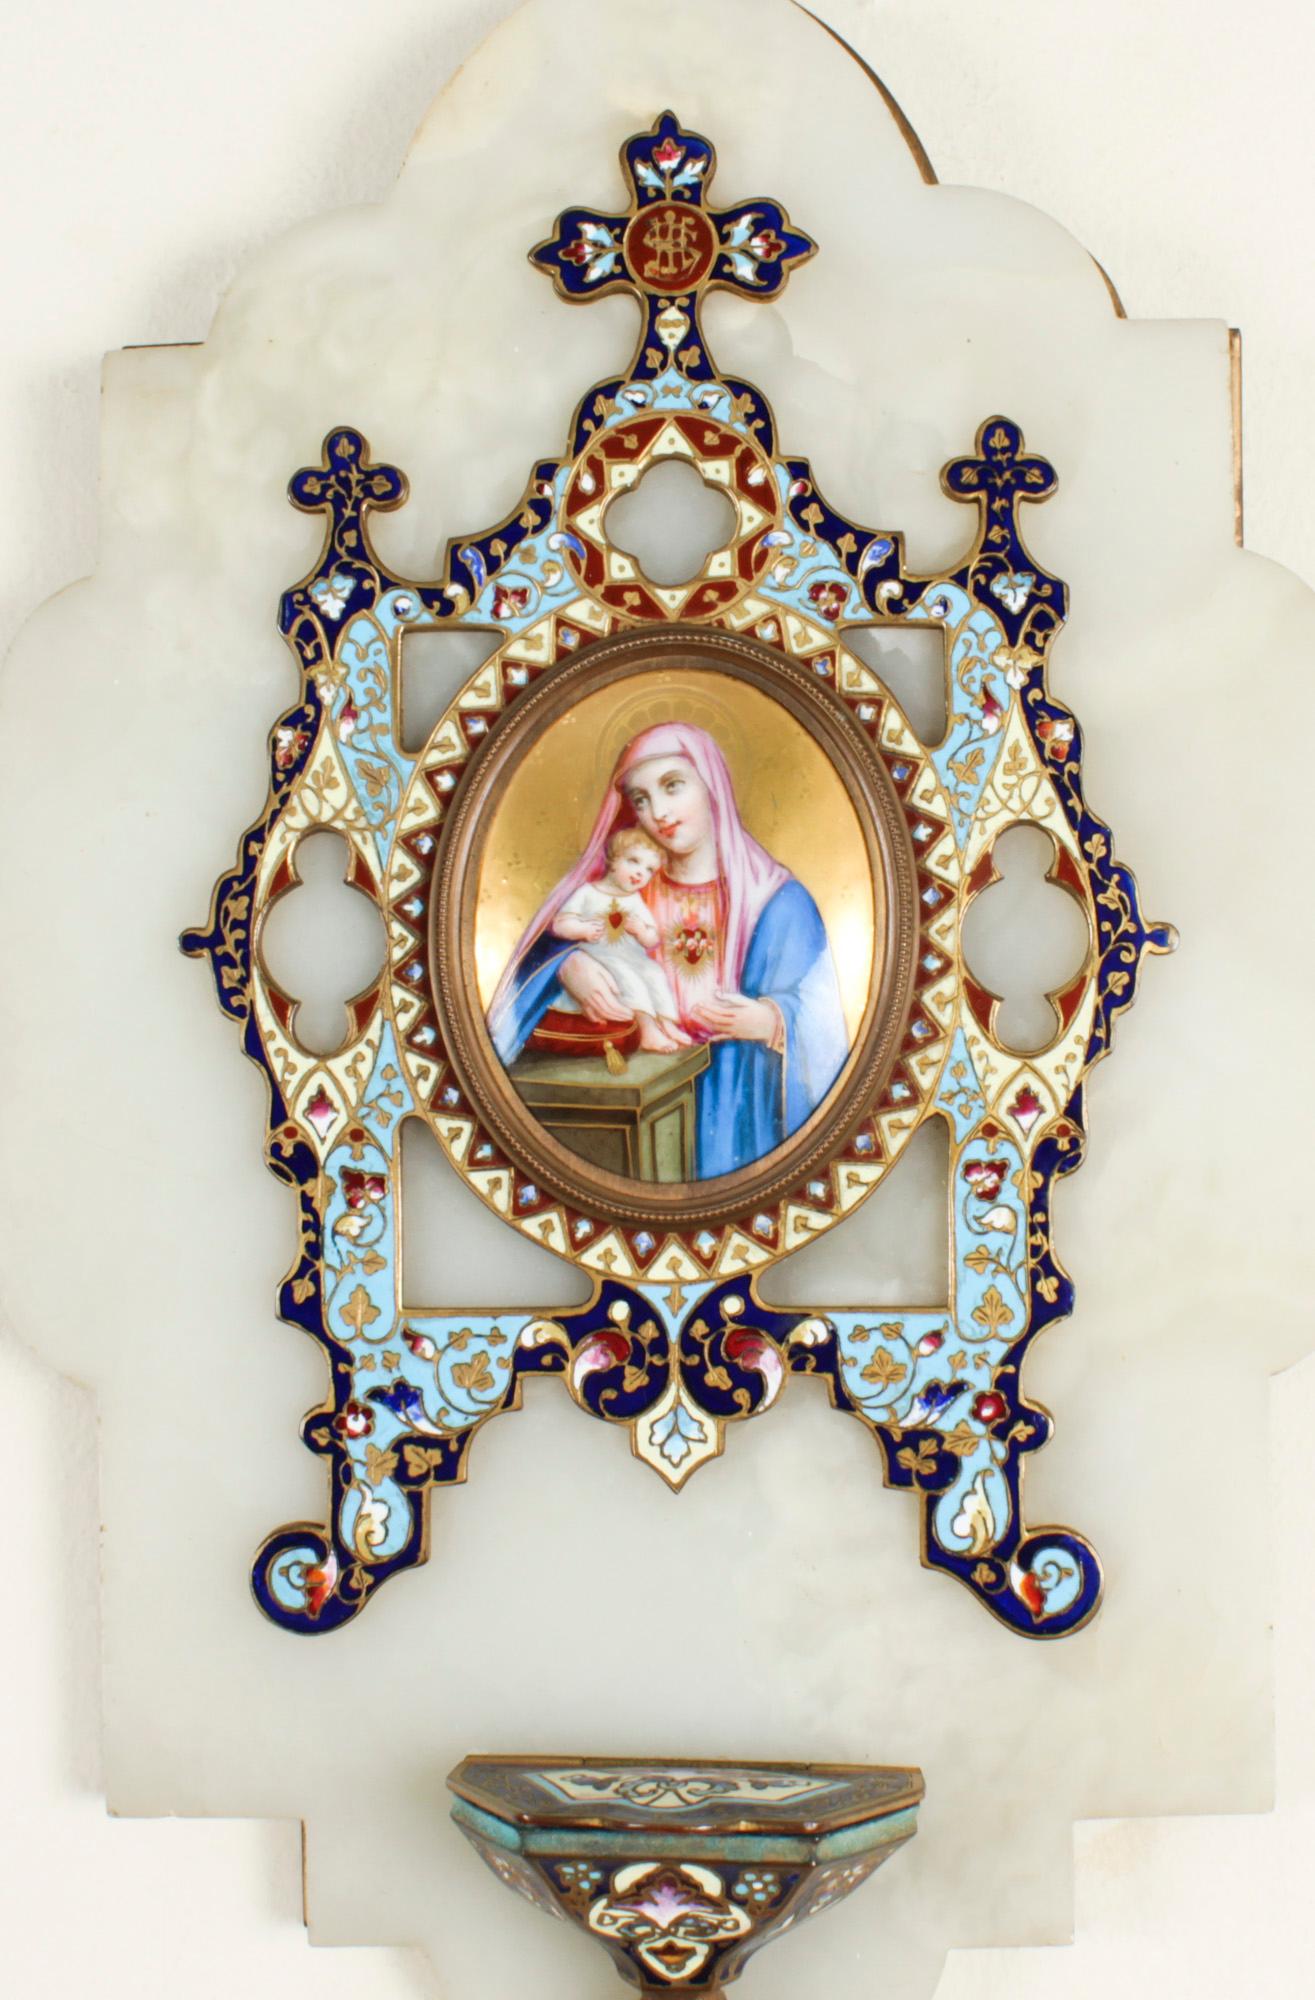 This is a beautiful large antique onyx, cloisonne' enamel decorated wall hanging holy water stoop, Circa 1880 in date.
 
The shaped marble surround is mounted on a gilt ormolu base. It is centred by an oval porcelain hand-painted portrait of the